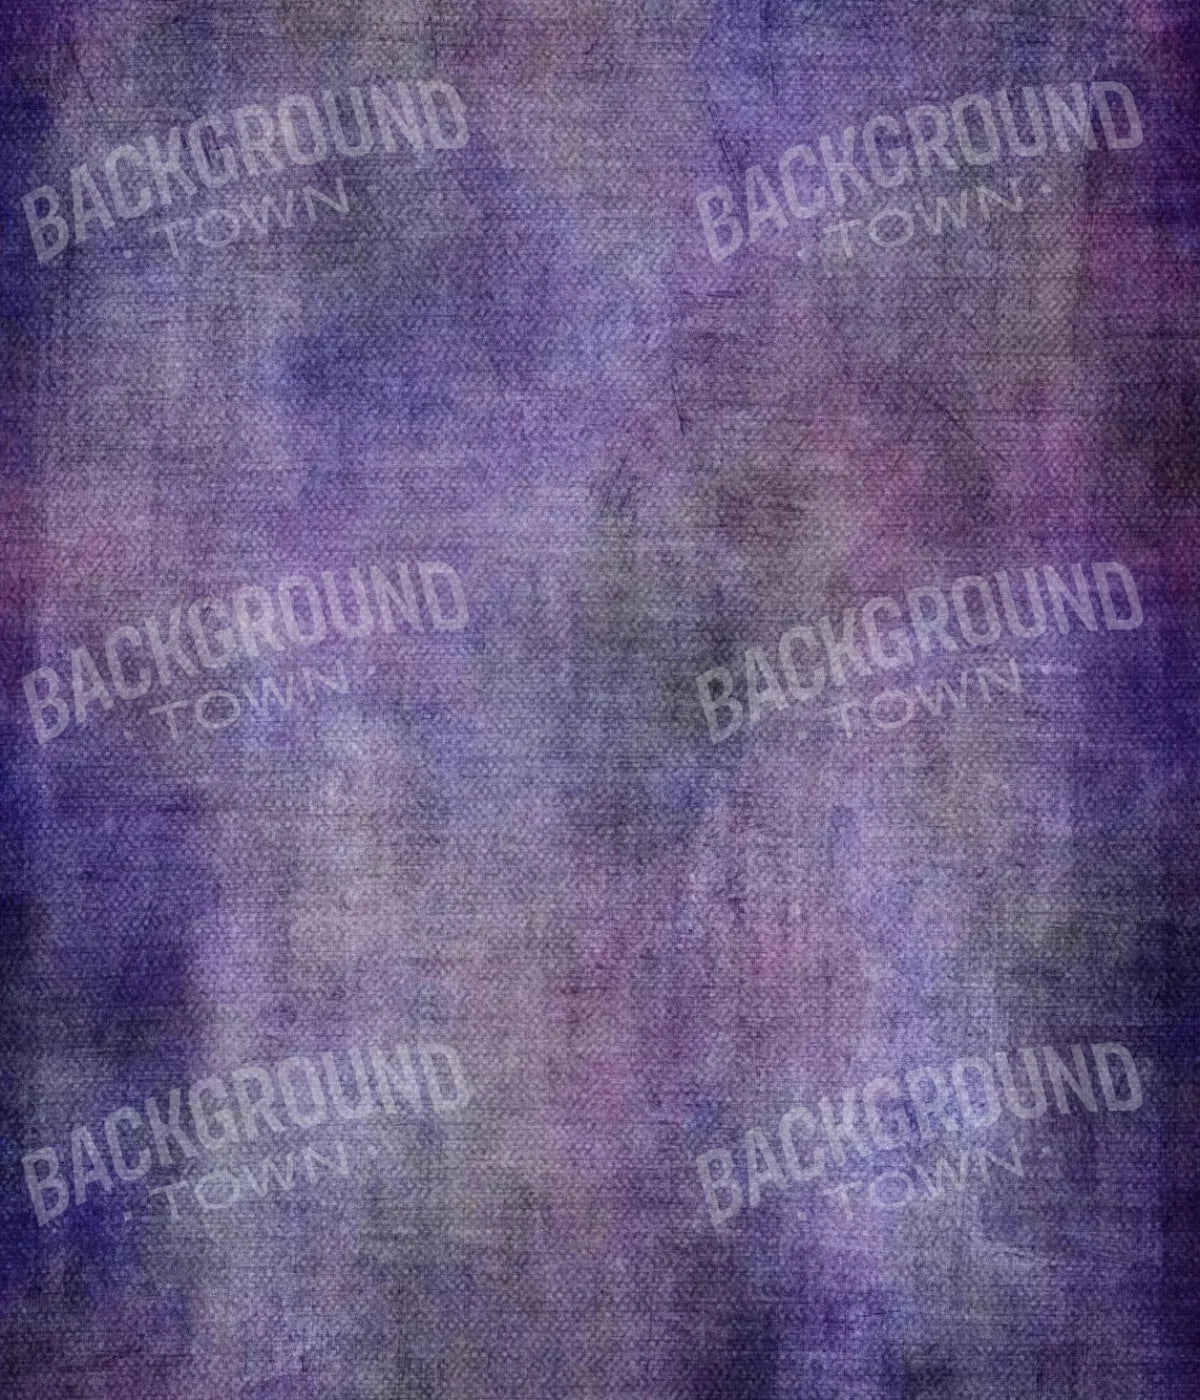 Berrymore 10X12 Ultracloth ( 120 X 144 Inch ) Backdrop